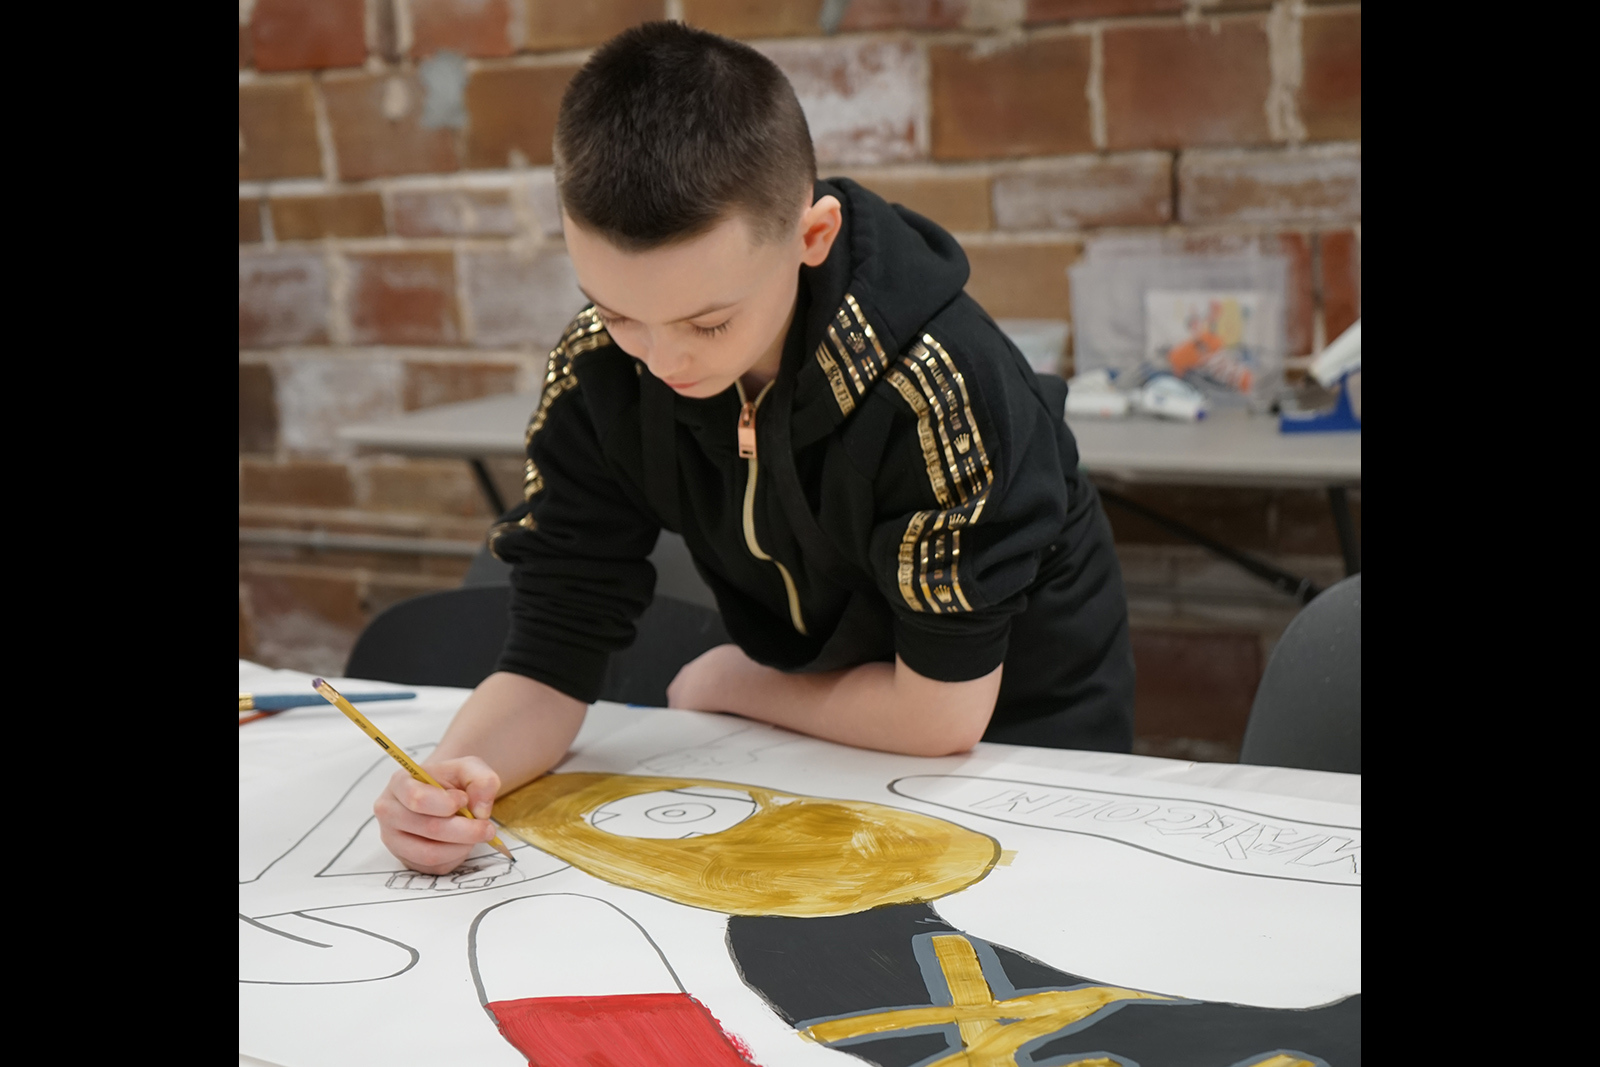 A young boy leans over a large drawing at work with a pencil